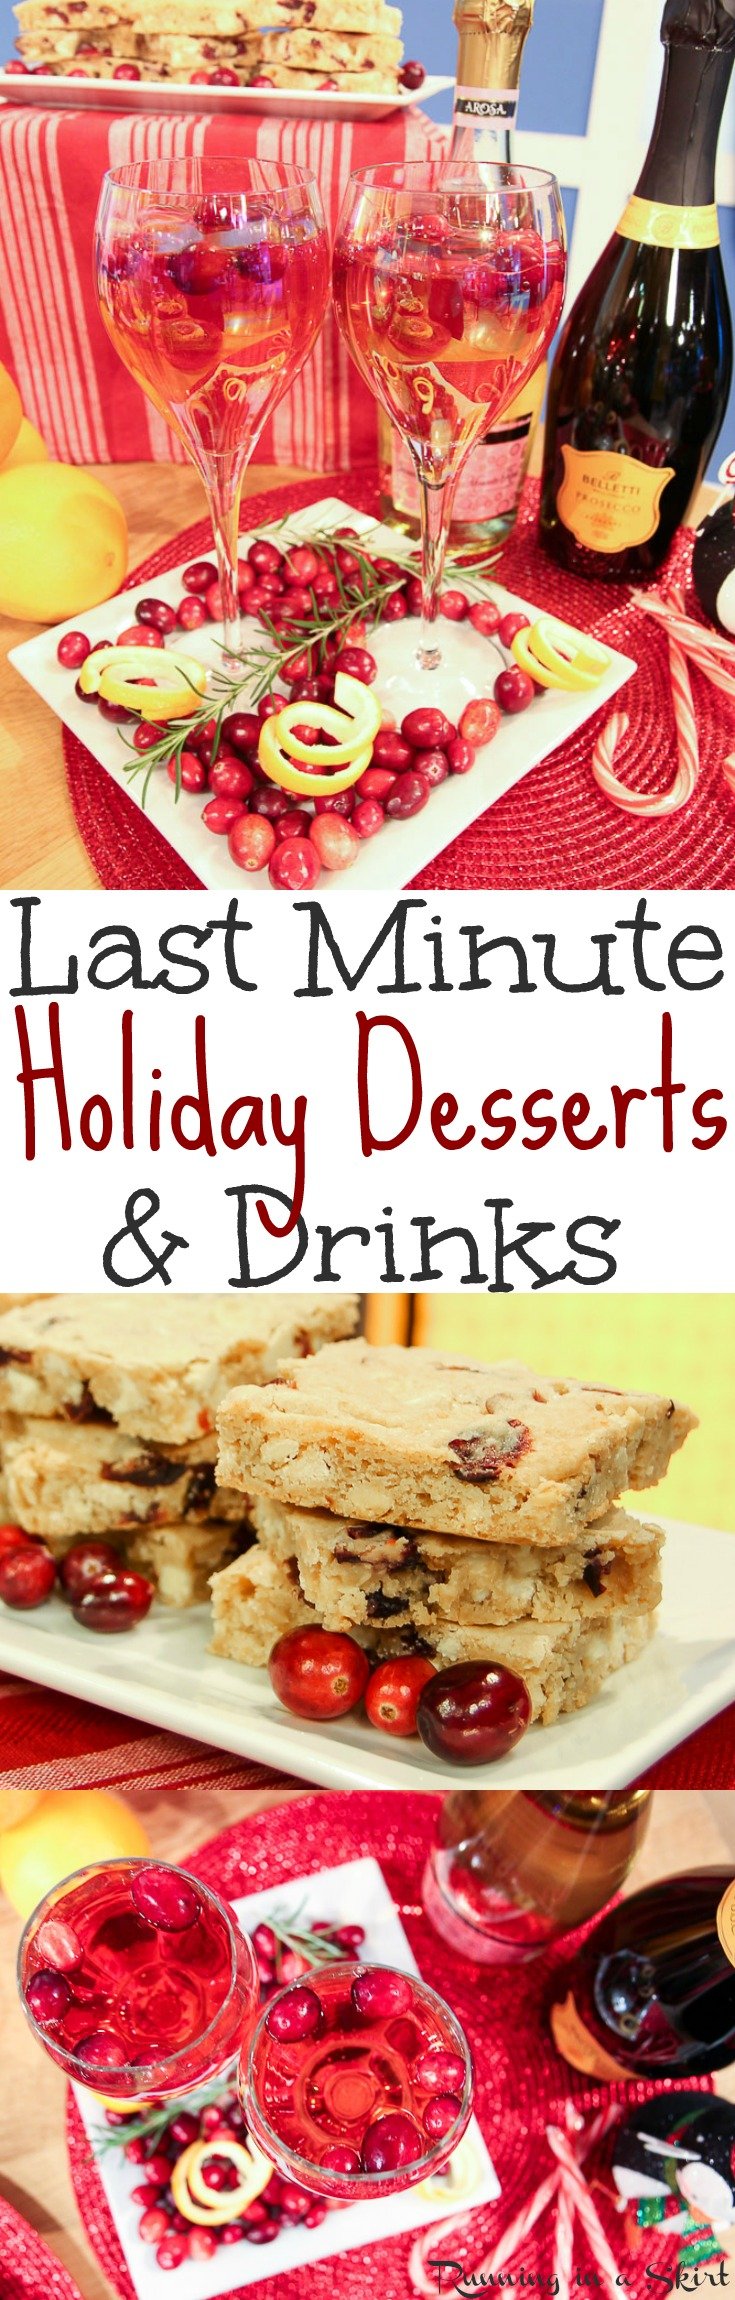 Last Minute Christmas Desserts & Drinks recipes for the holidays.  Budget friendly, fast, simple and easy ideas from ALDI.  These holiday desserts are great for a party or for a crowd.  Includes an easy recipe for White Chocolate Cranberry Blondies and the perfect holiday drink for adults. / Running in a Skirt #ALDIlove @aldiusa via @juliewunder